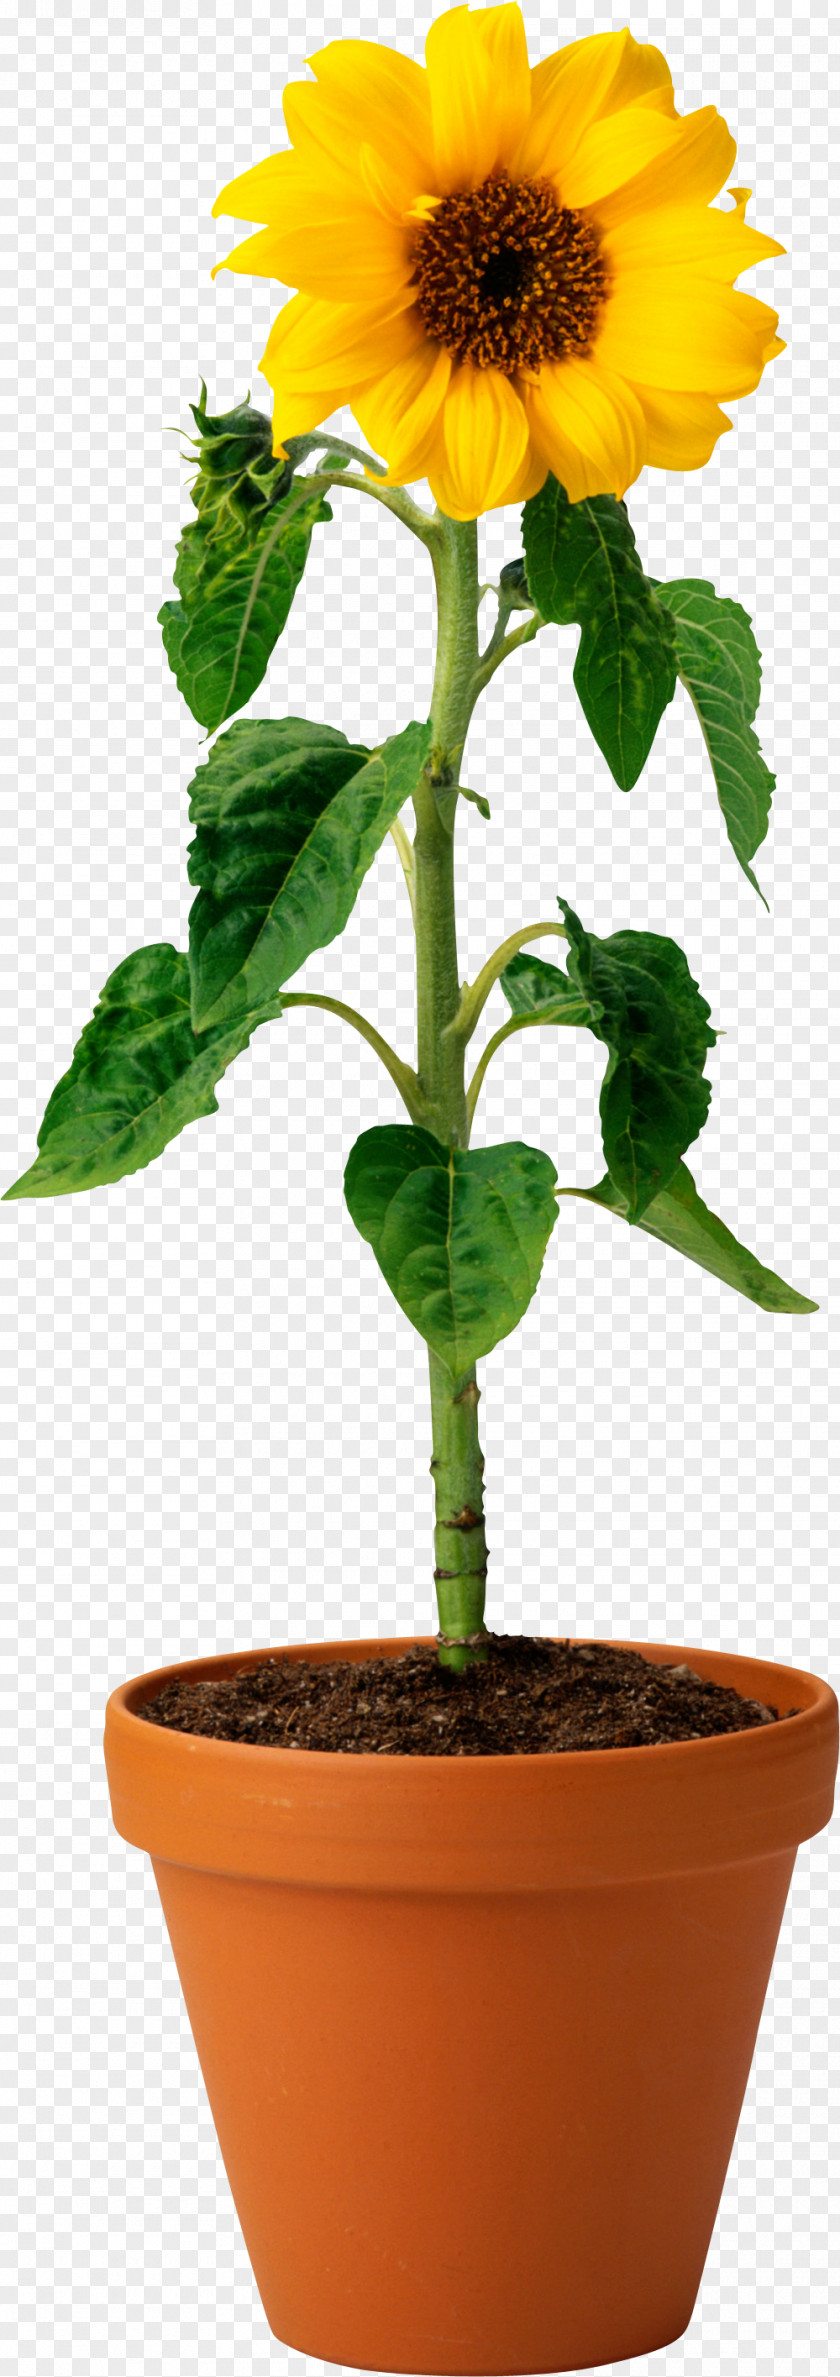 Sunflower Germination Seedling Spore Plant Reproduction PNG